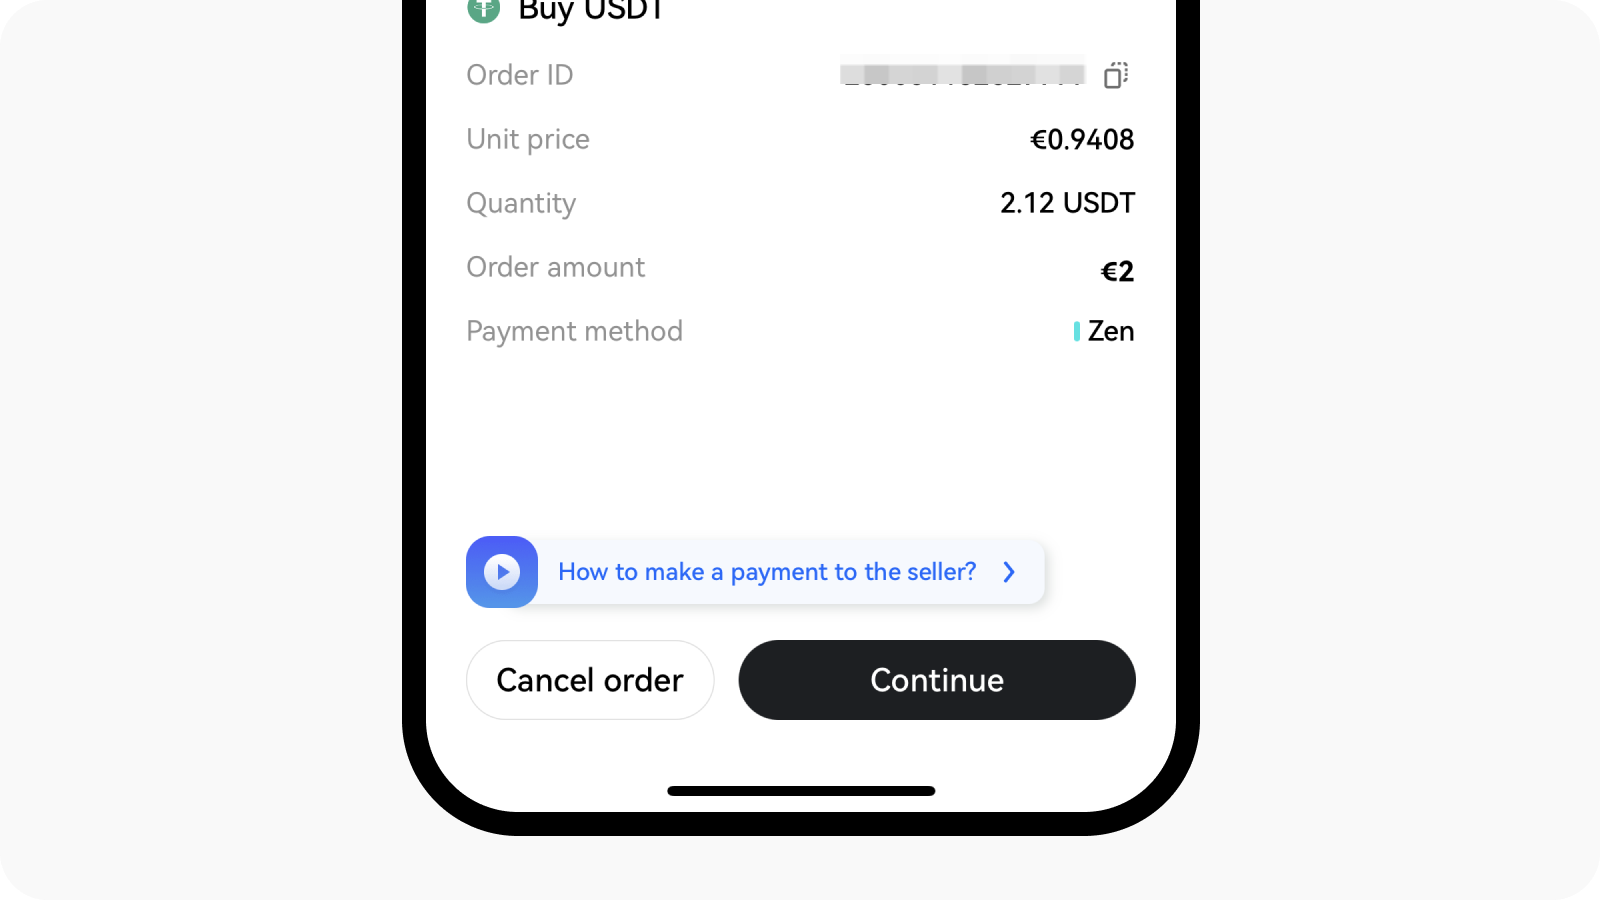 On App: Cancel order on the order details page